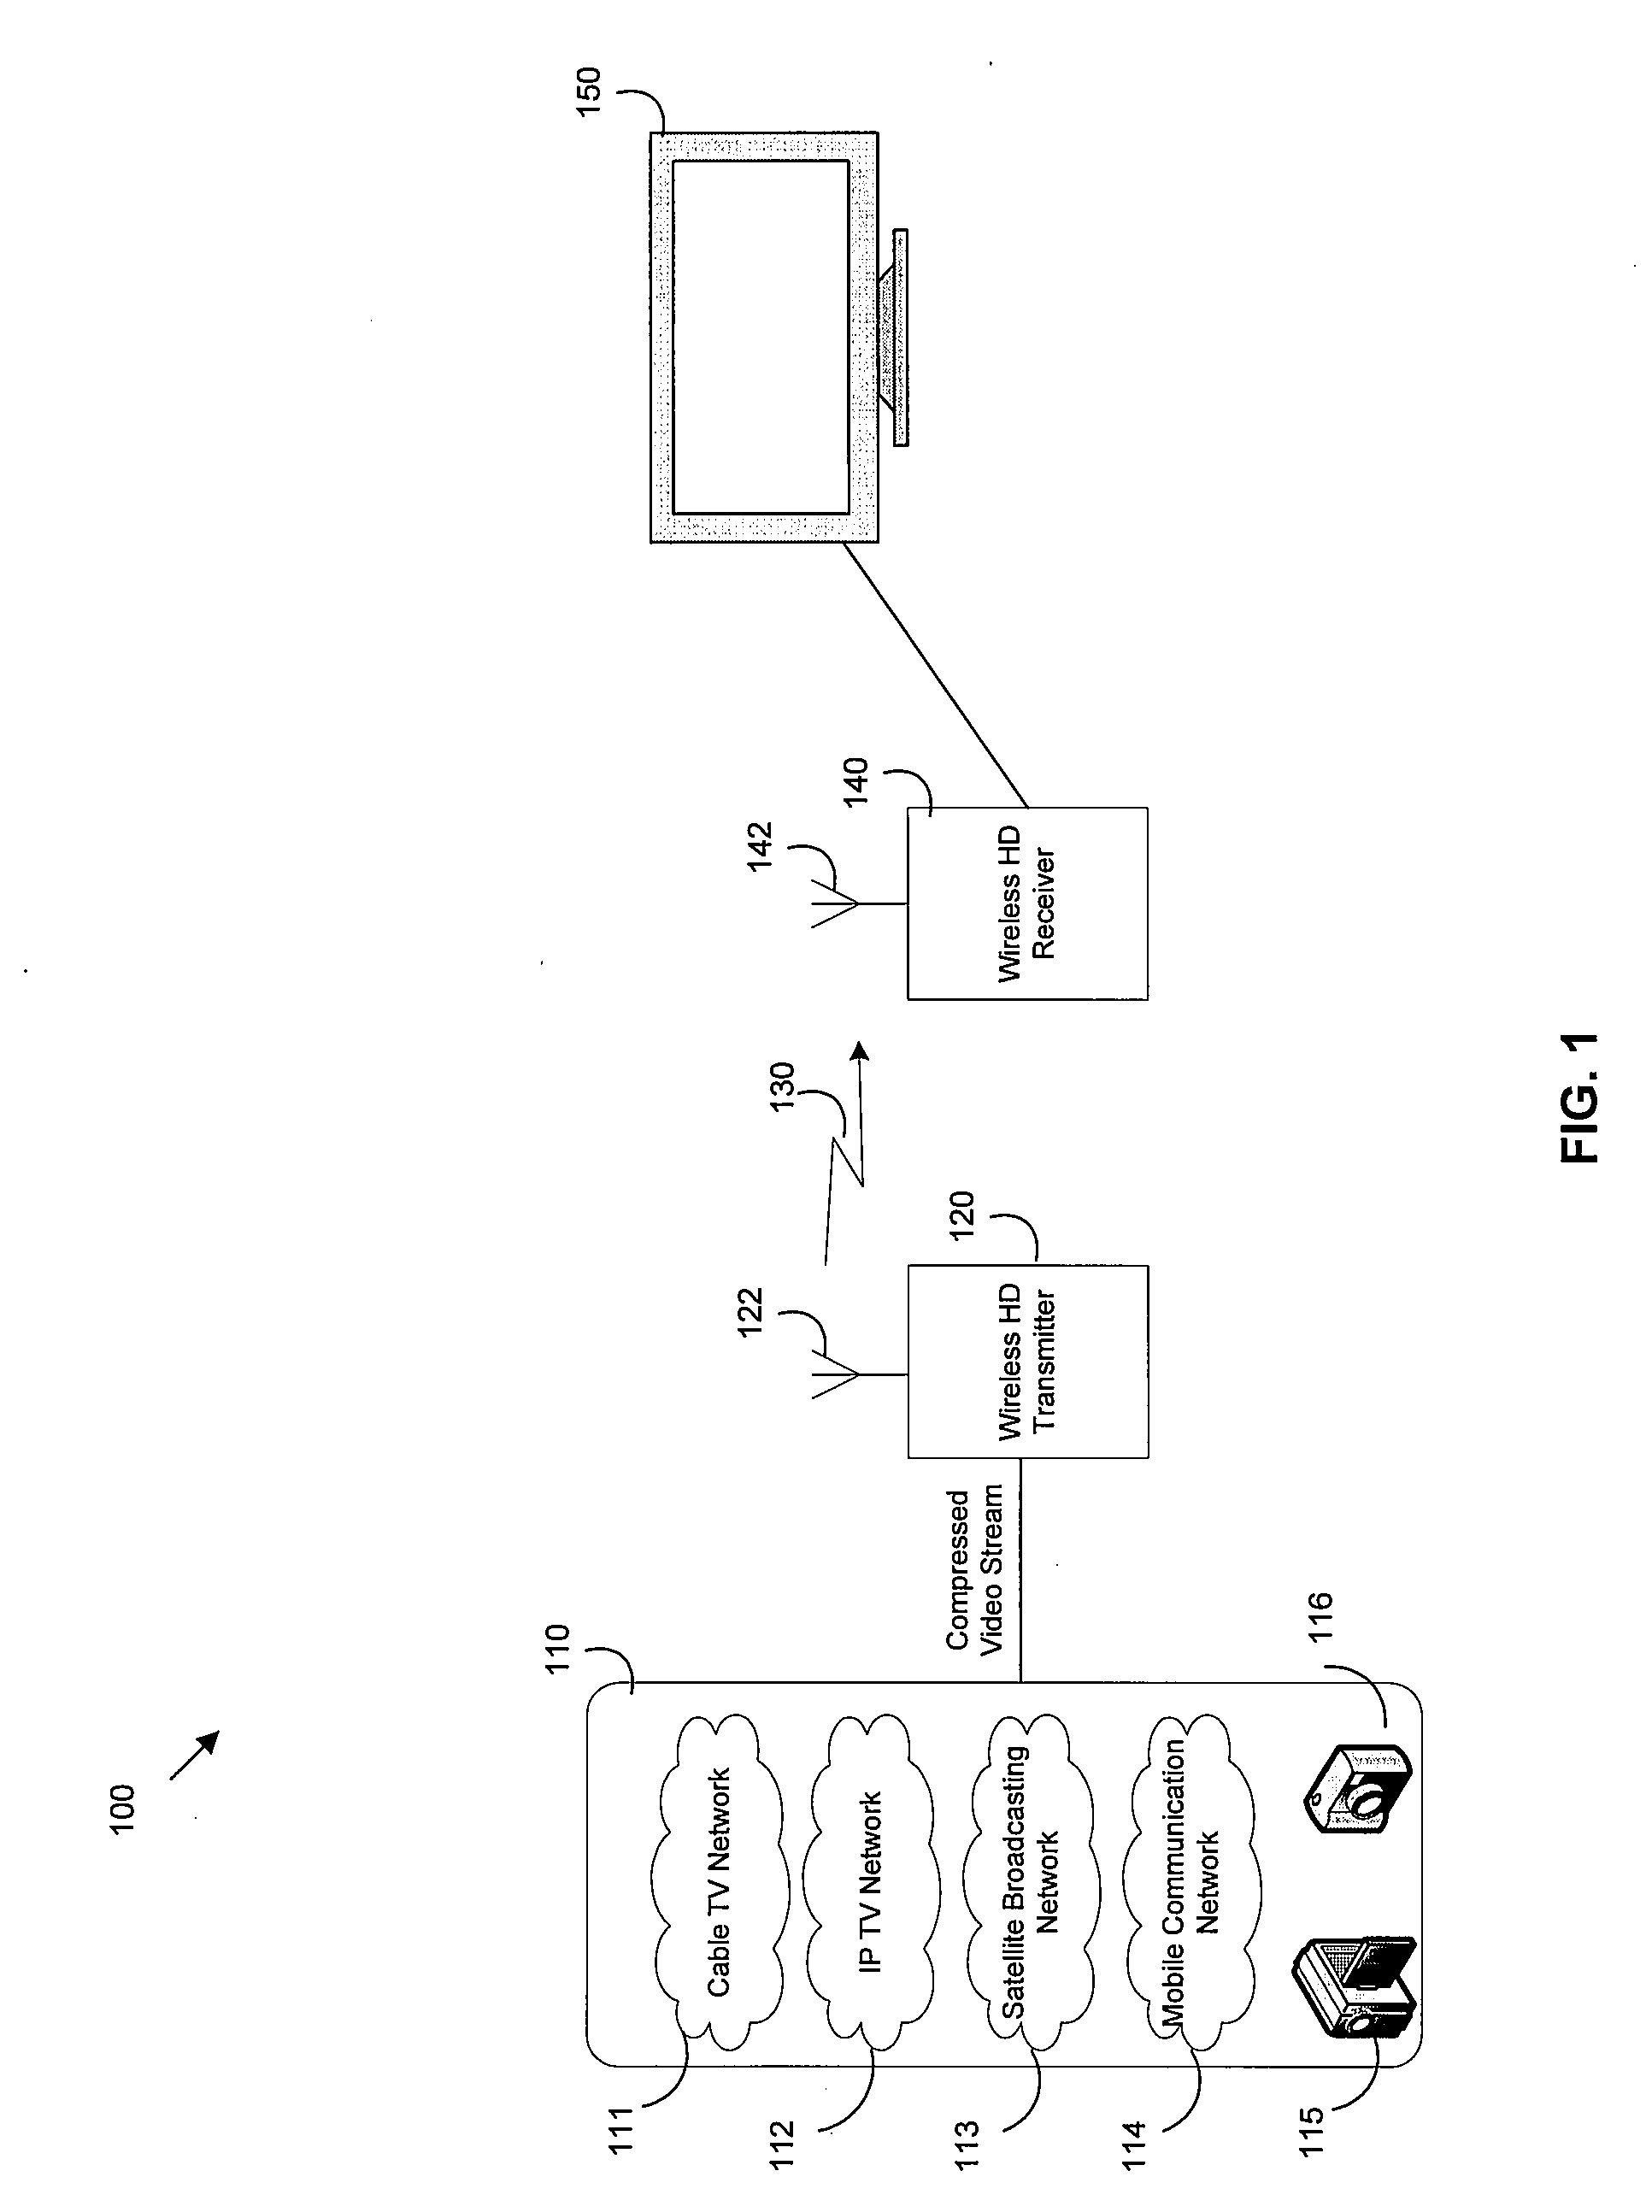 Method and system for motion-compensated frame-rate up-conversion for both compressed and decompressed video bitstreams